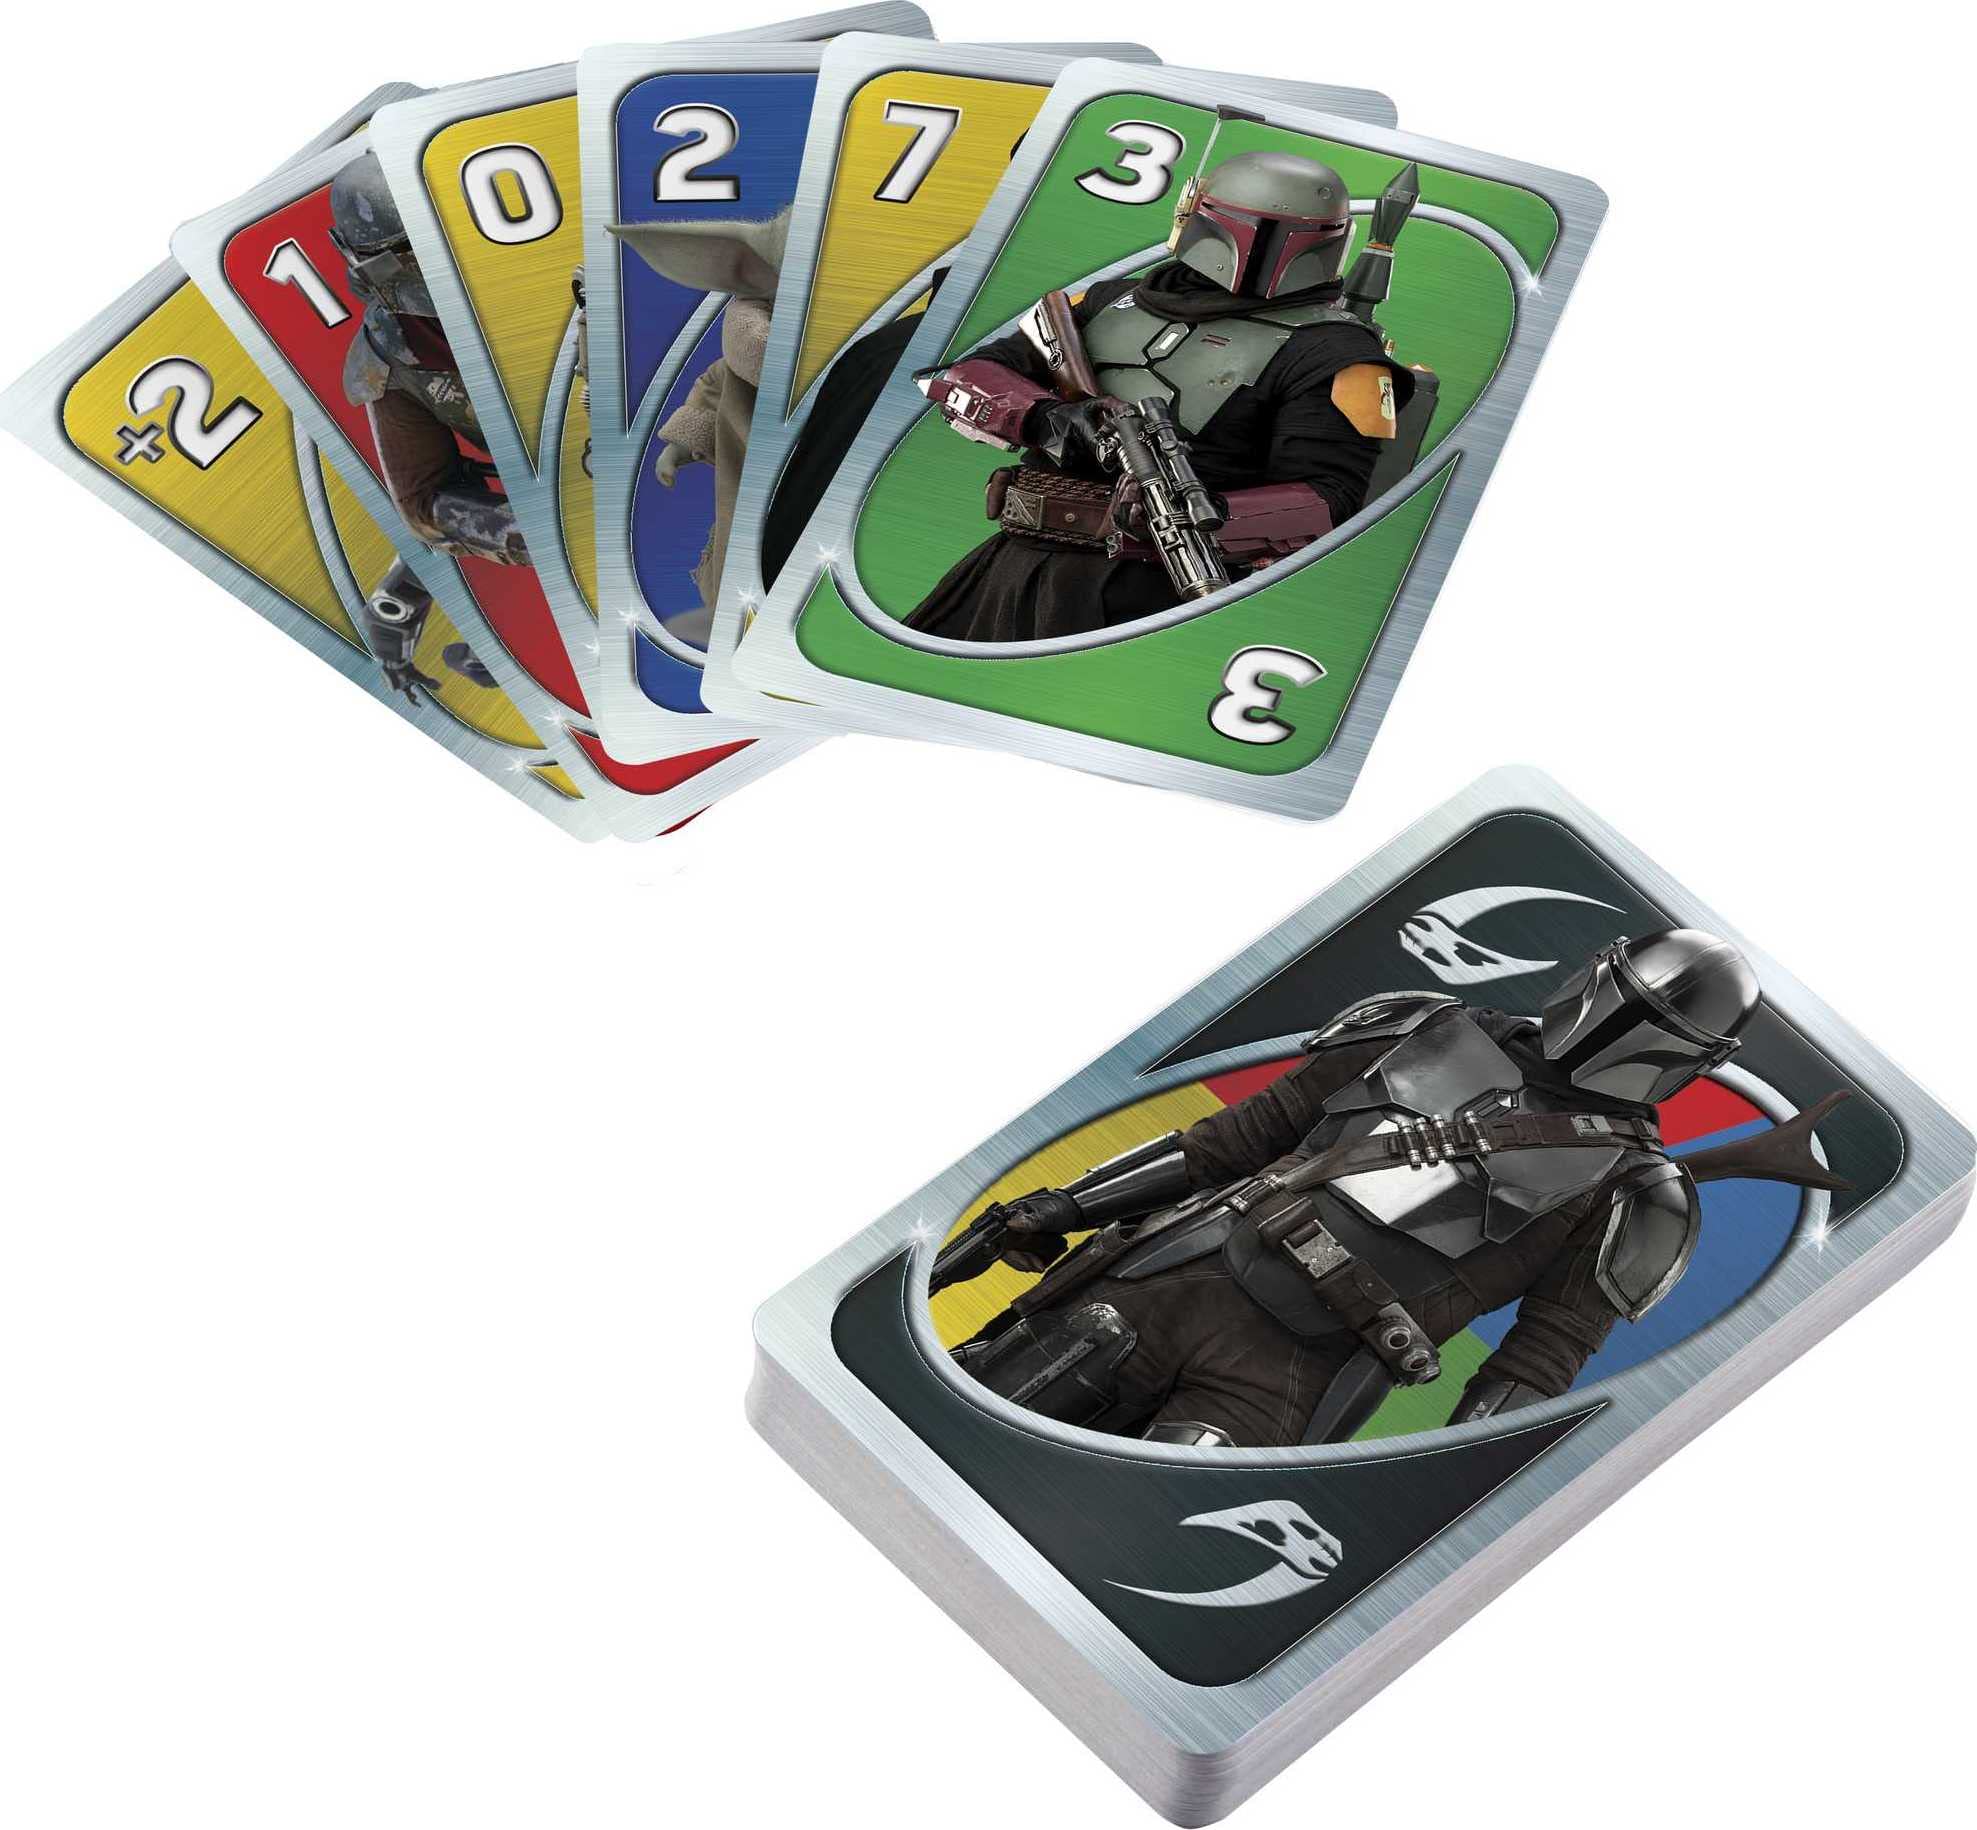 UNO Star Wars the Mandalorian Card Game, Travel Game in Collectible Storage Tin & Special Rule, 2-10 Players (Amazon Exclusive)